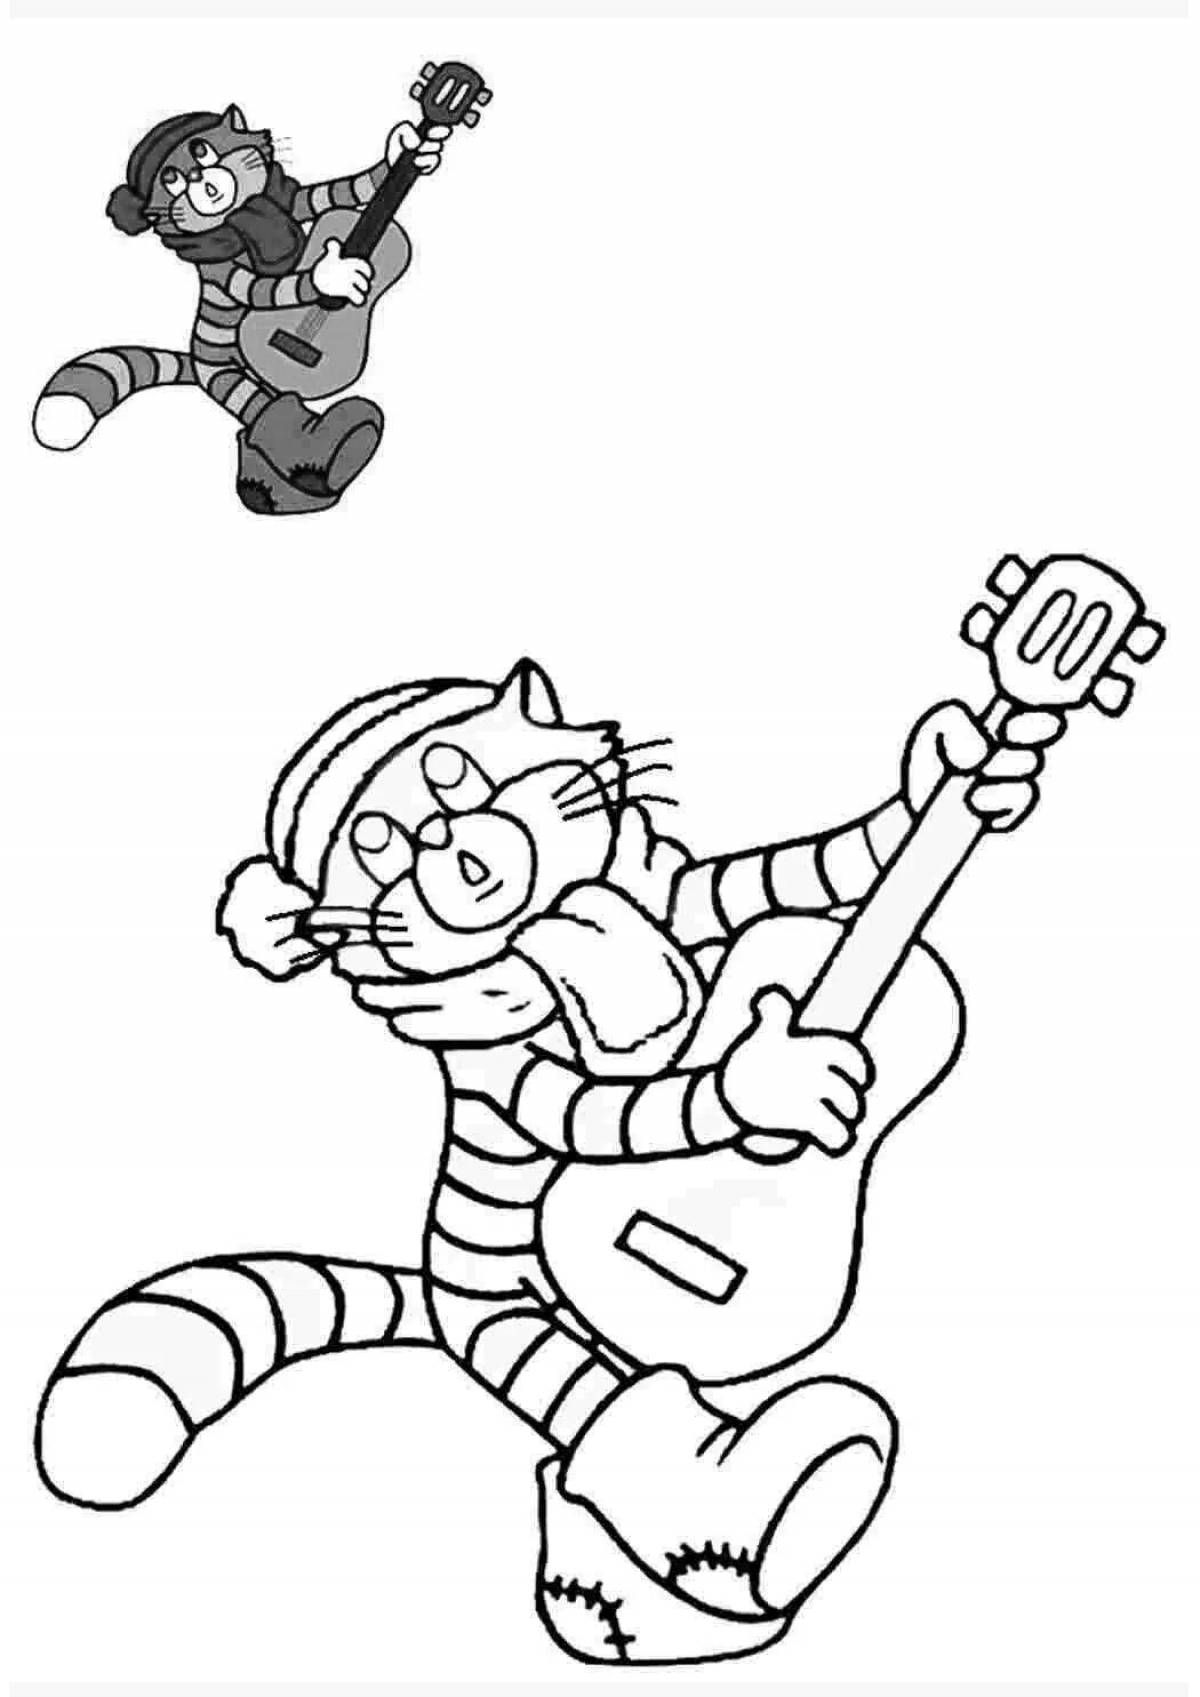 Fun sailor skin coloring page for kids